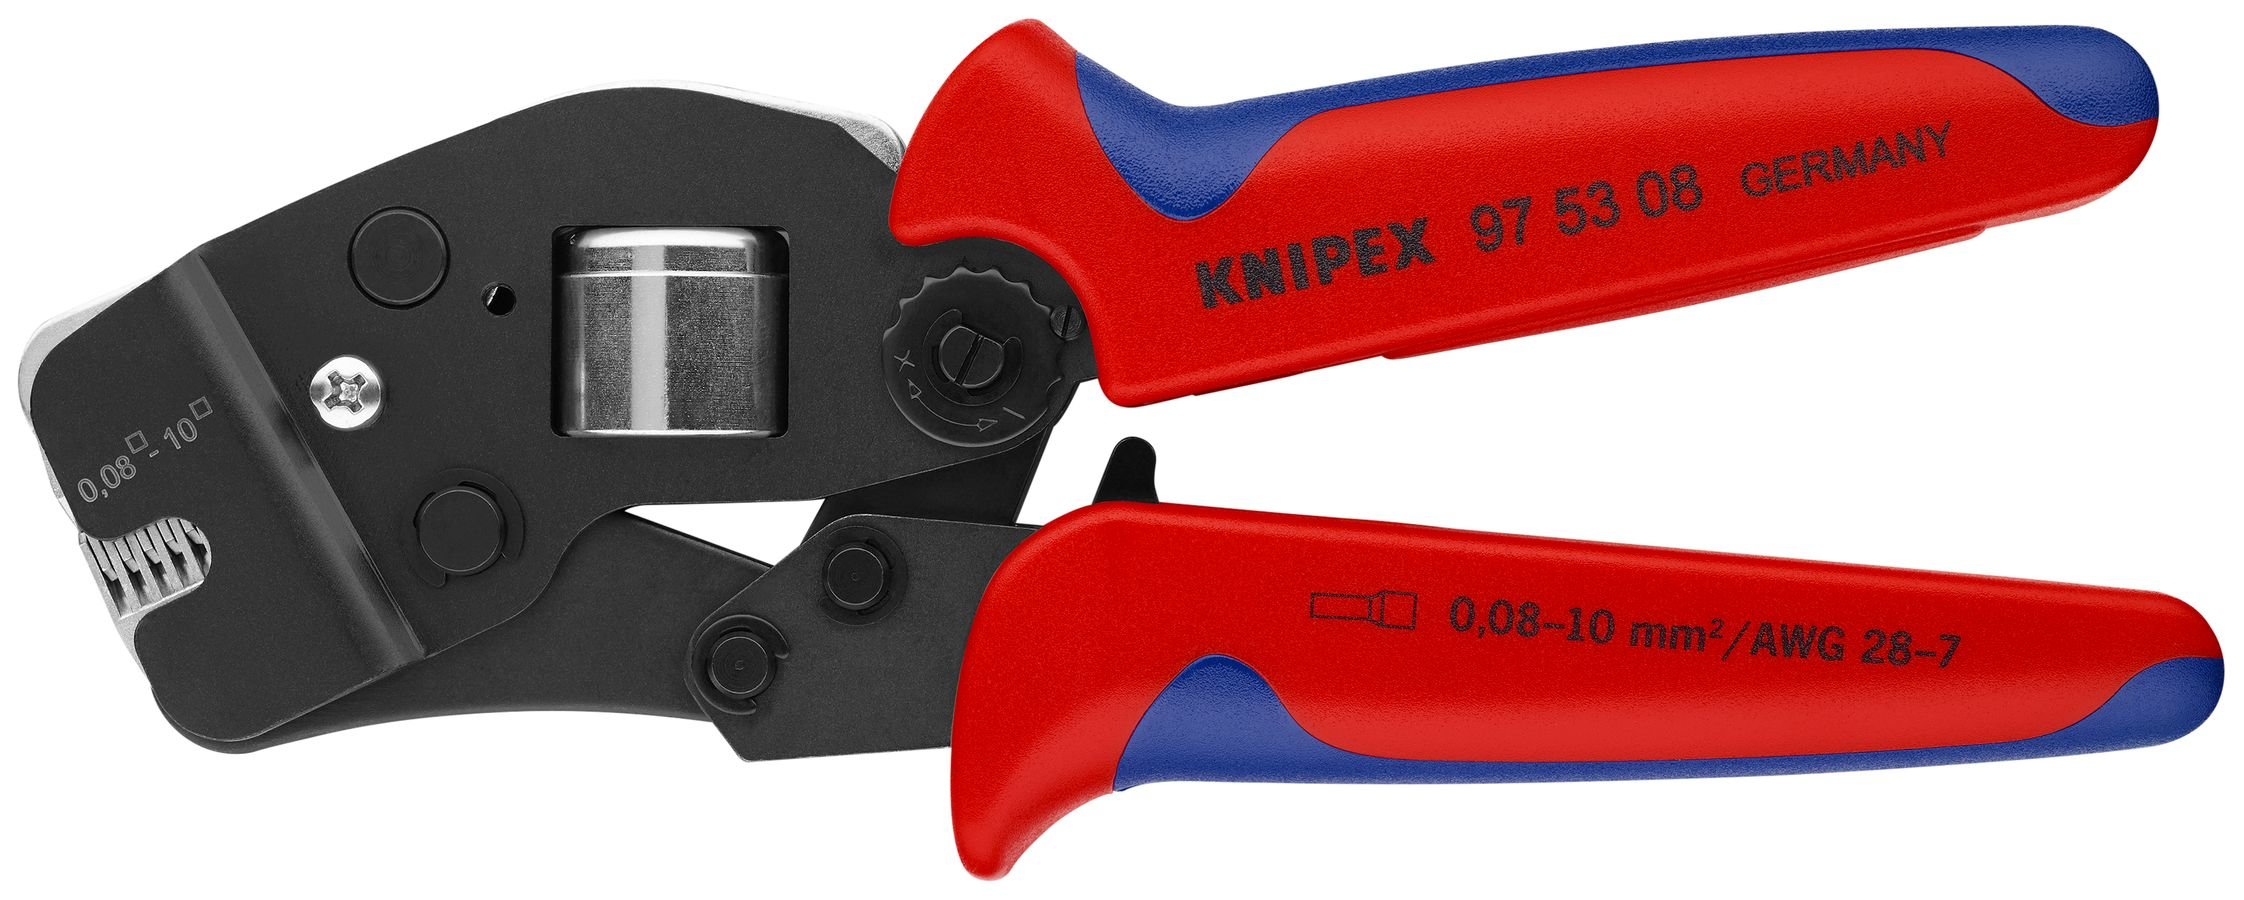 Self-Adjusting Crimping Pliers For Wire Ferrules | KNIPEX Tools